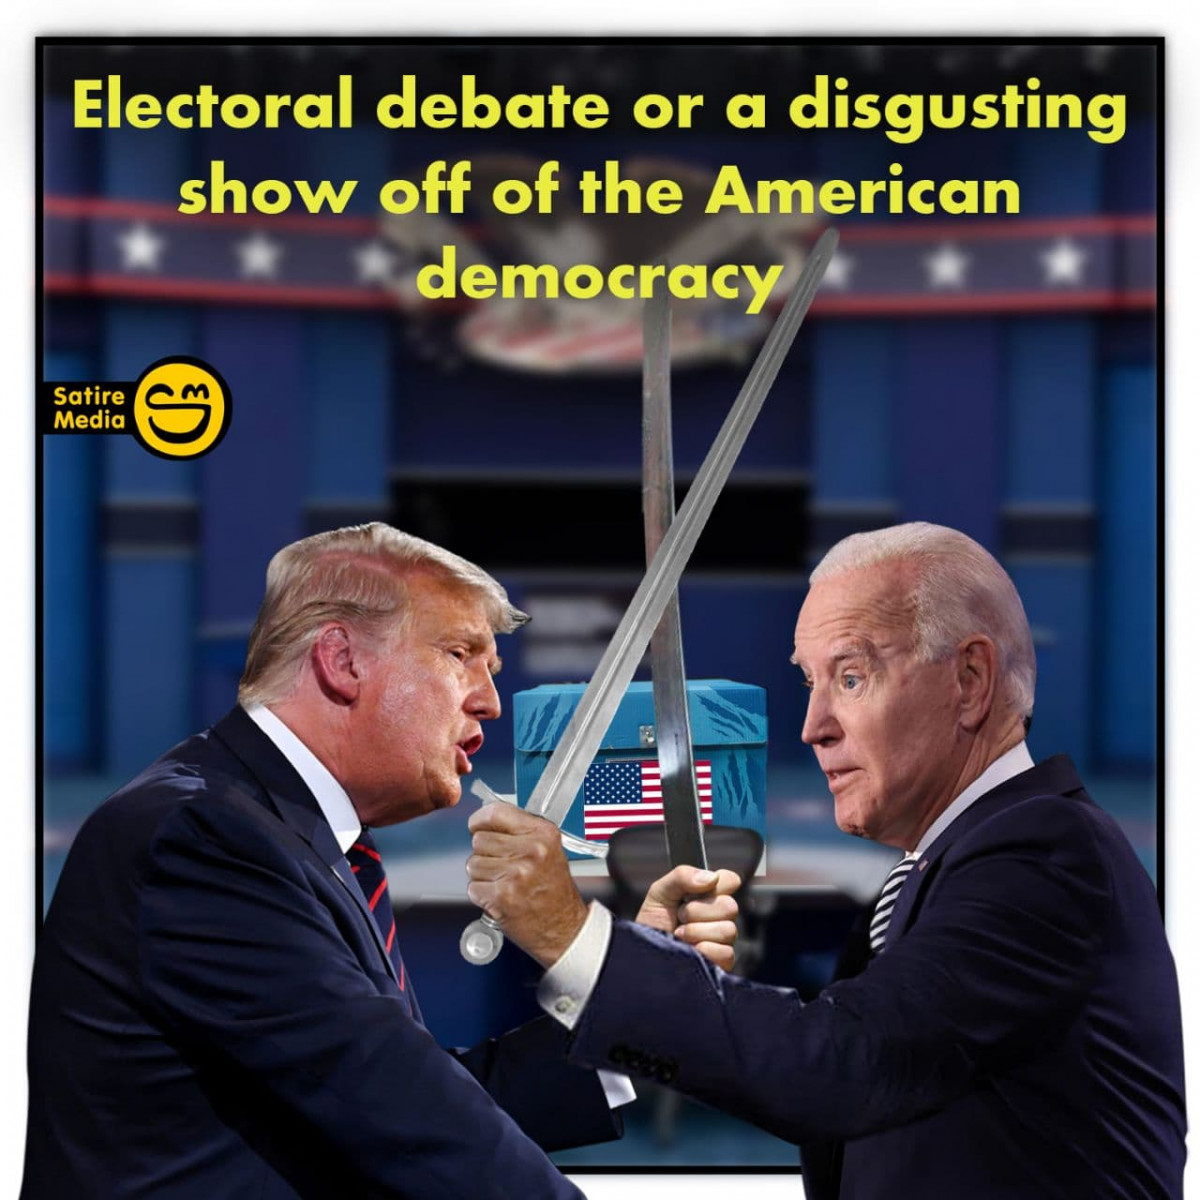 Electoral debate or a disgusting show off of the American democracy